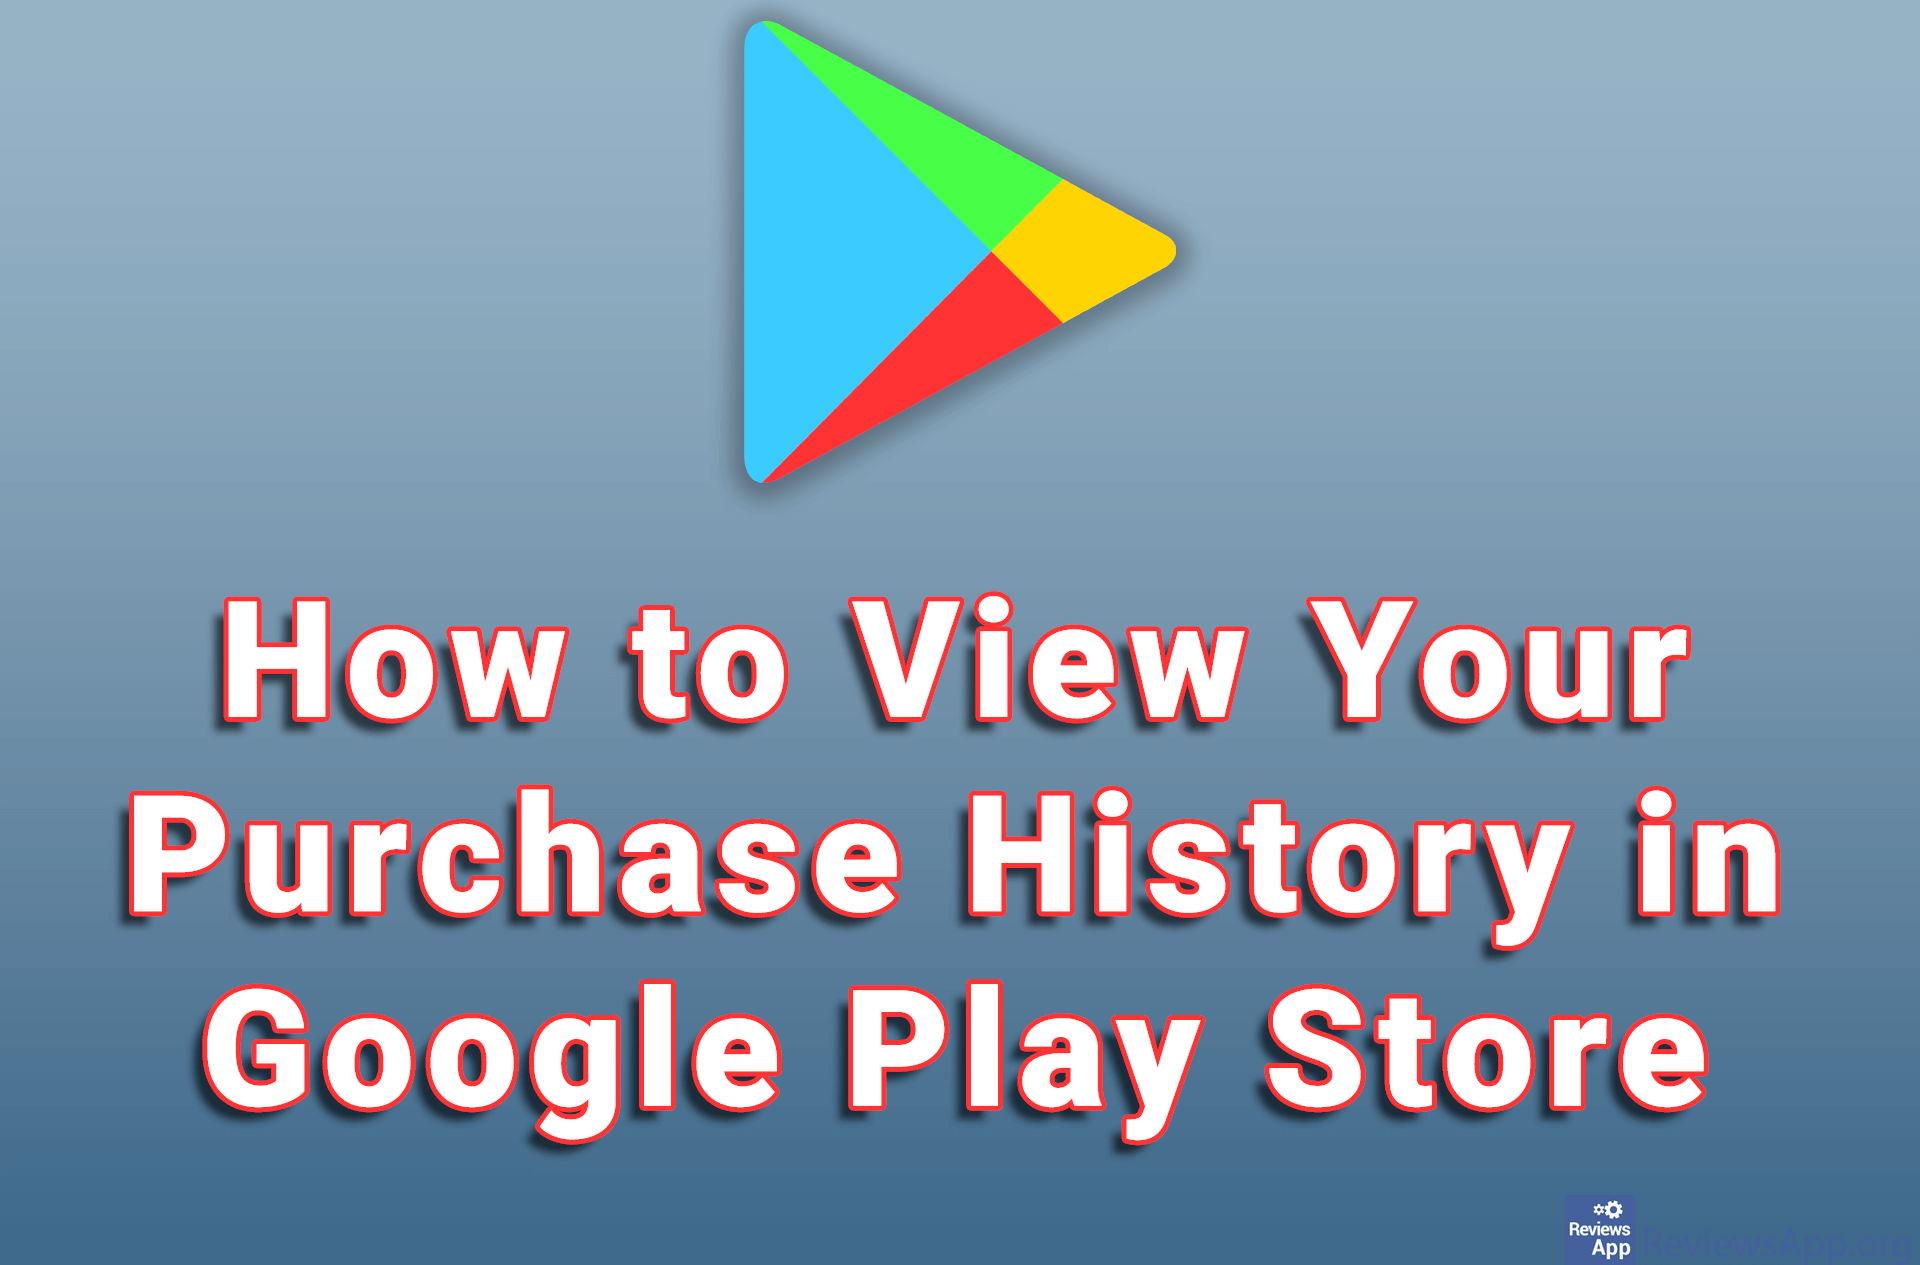 How to View Your Purchase History in Google Play Store